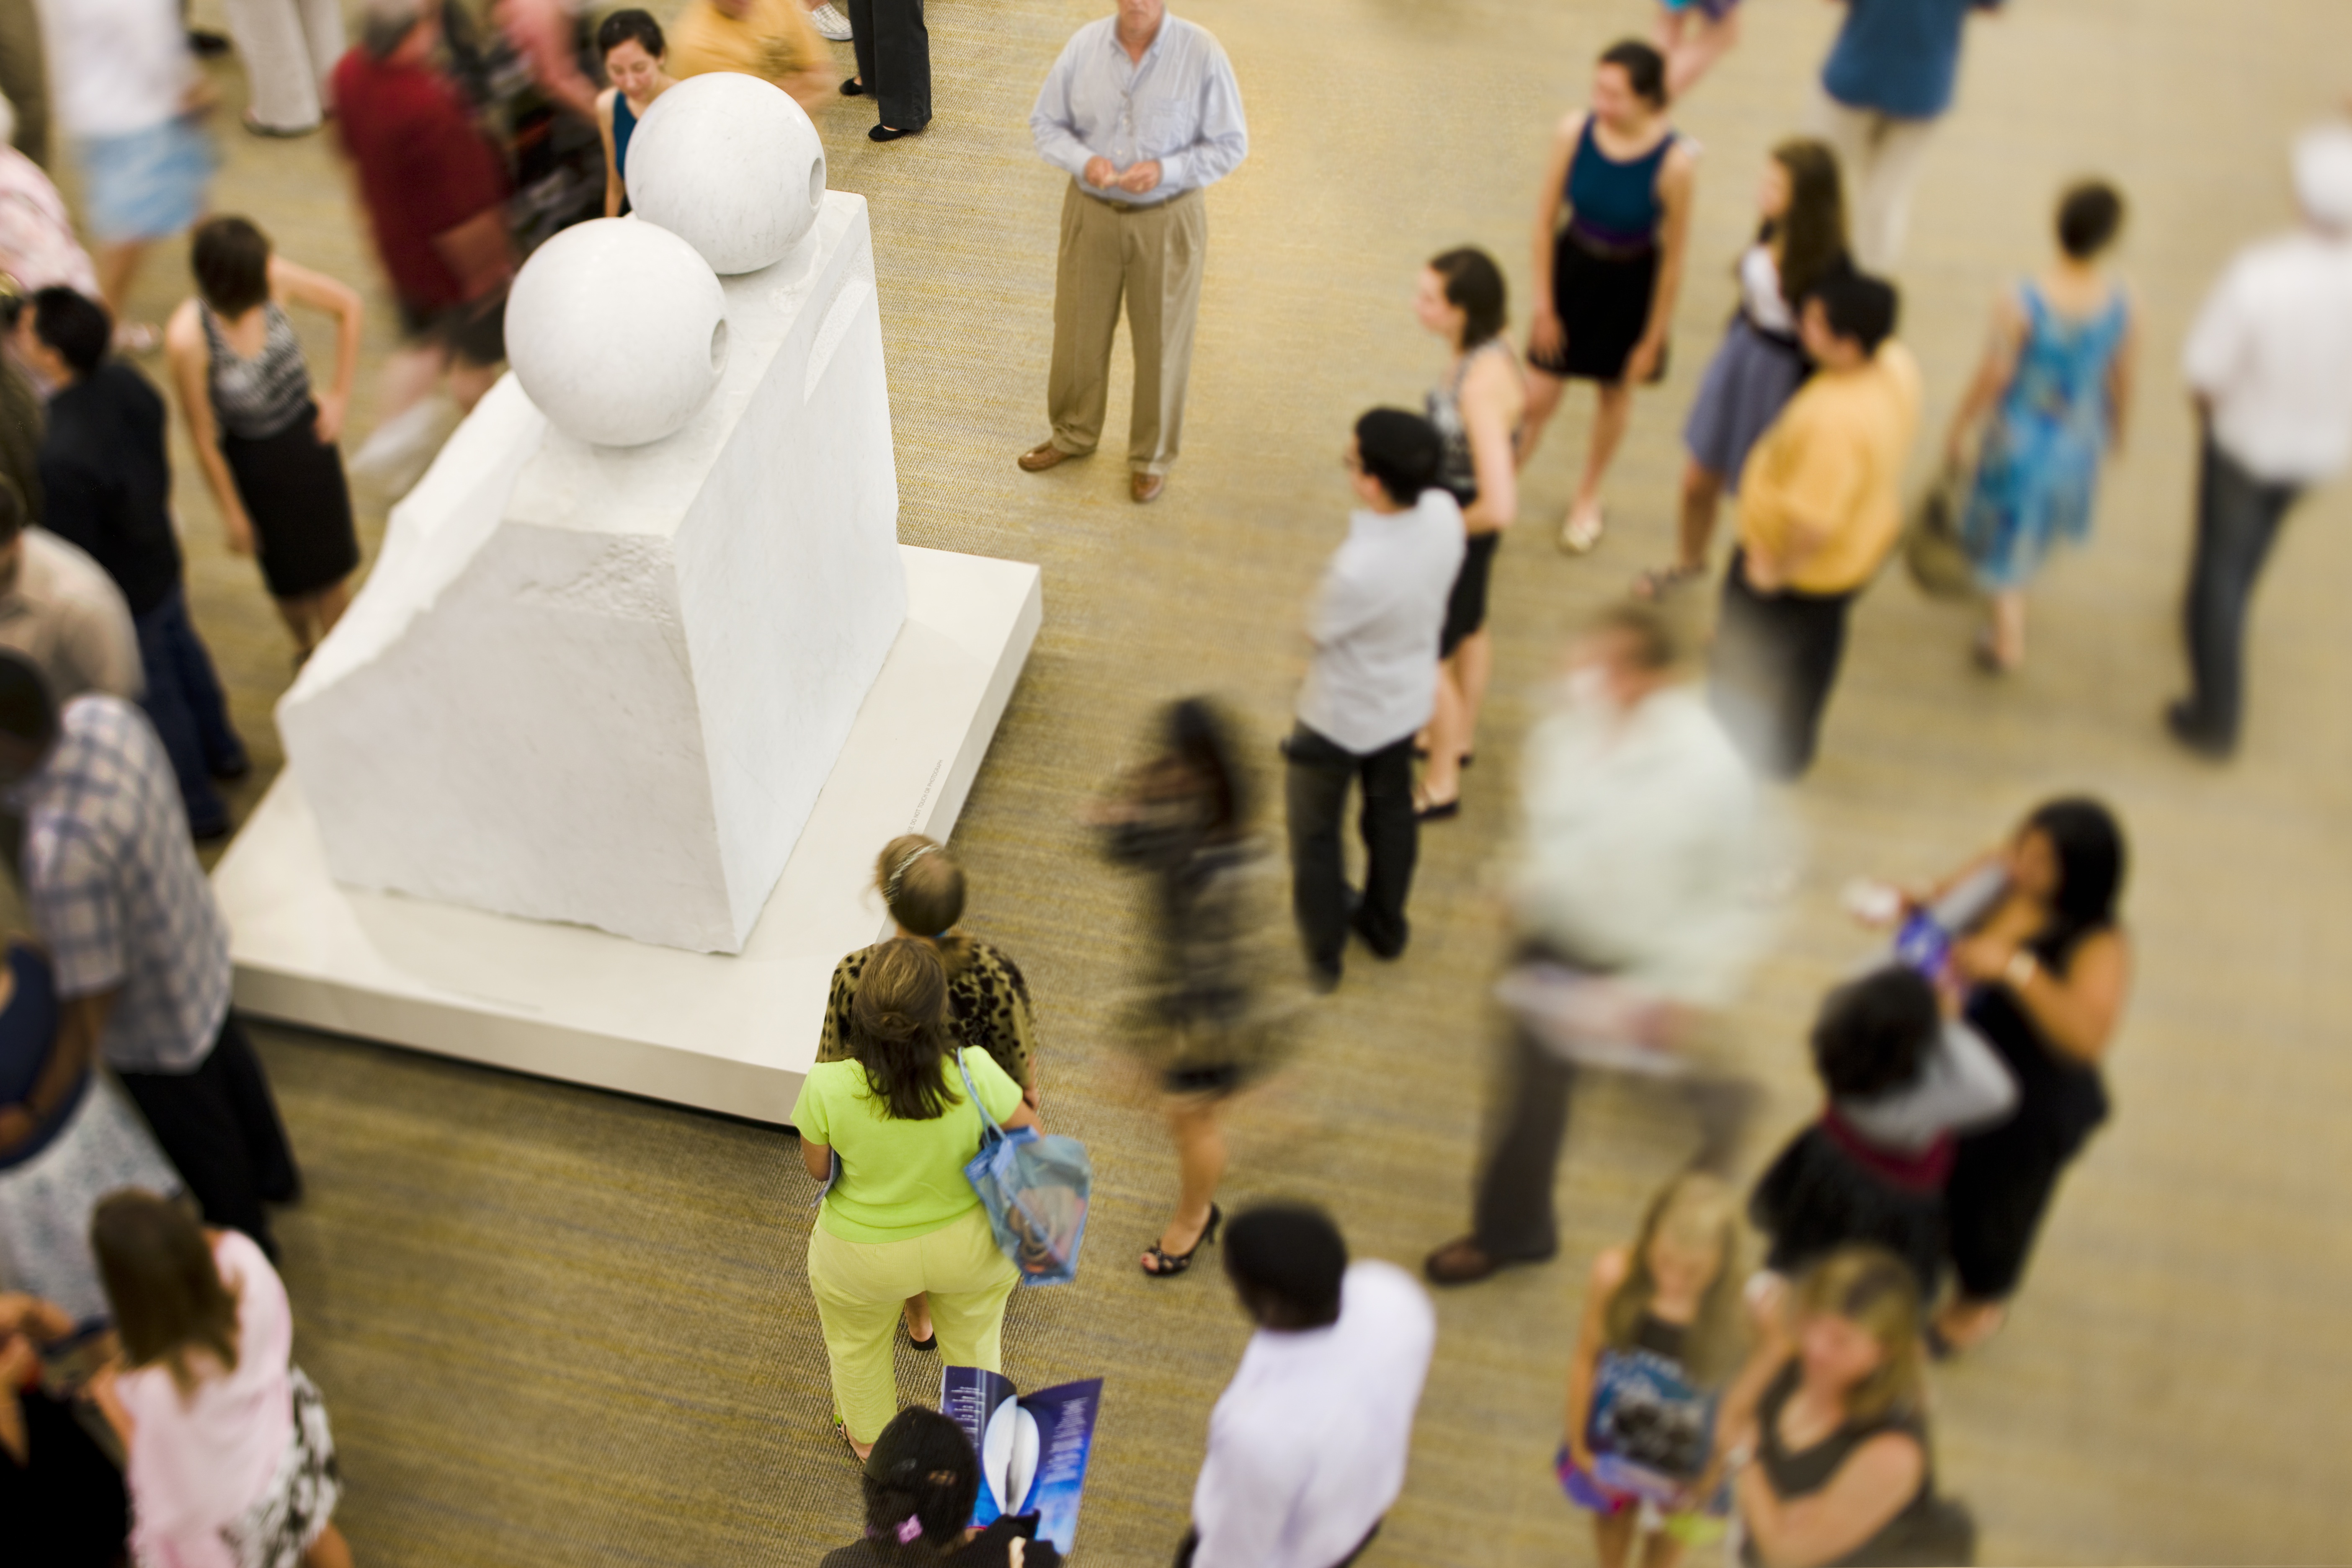 marble sculpture in crowd